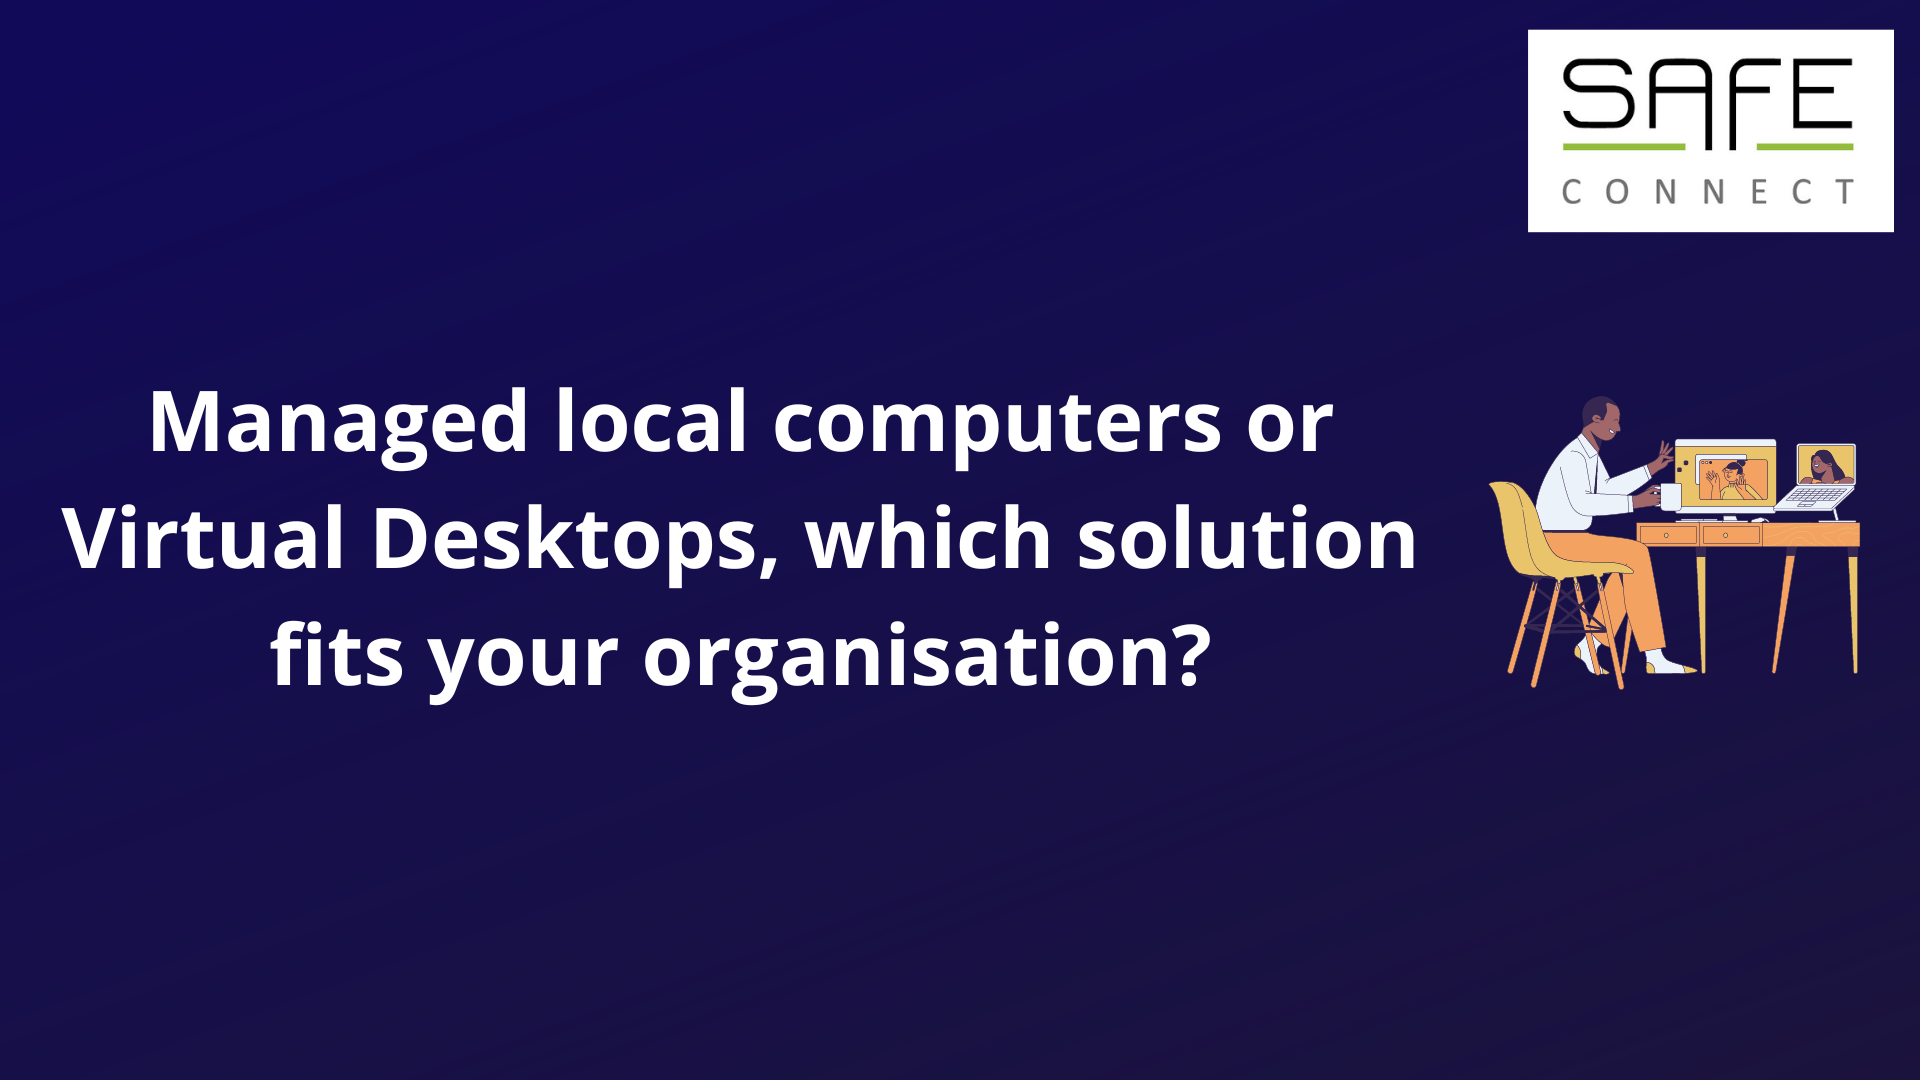 Managed local computers or Virtual Desktops, which solution fits your organisation